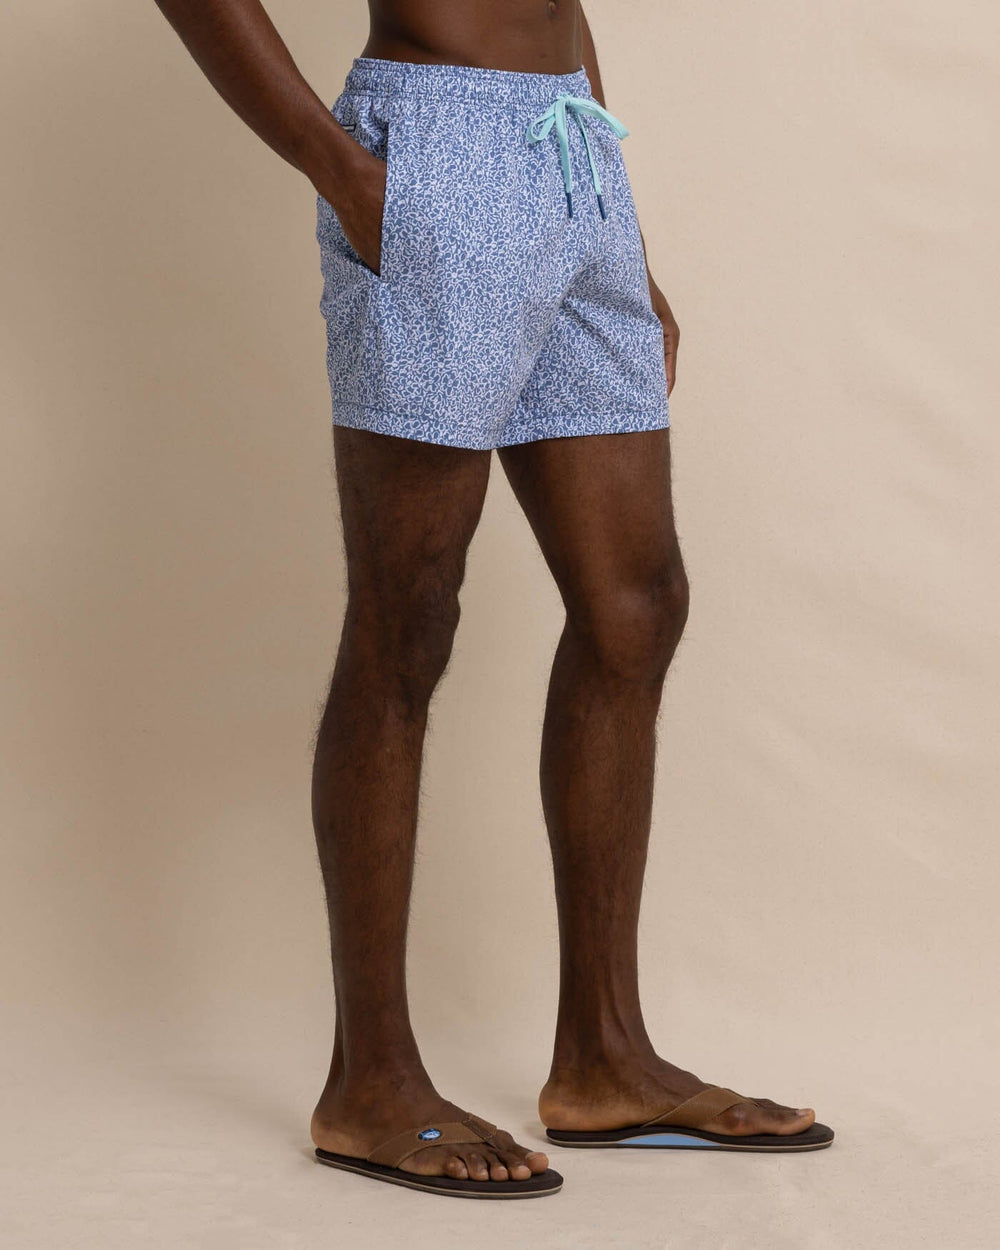 The front view of the Southern Tide That Floral Feeling Swim Trunk by Southern Tide - Coronet Blue